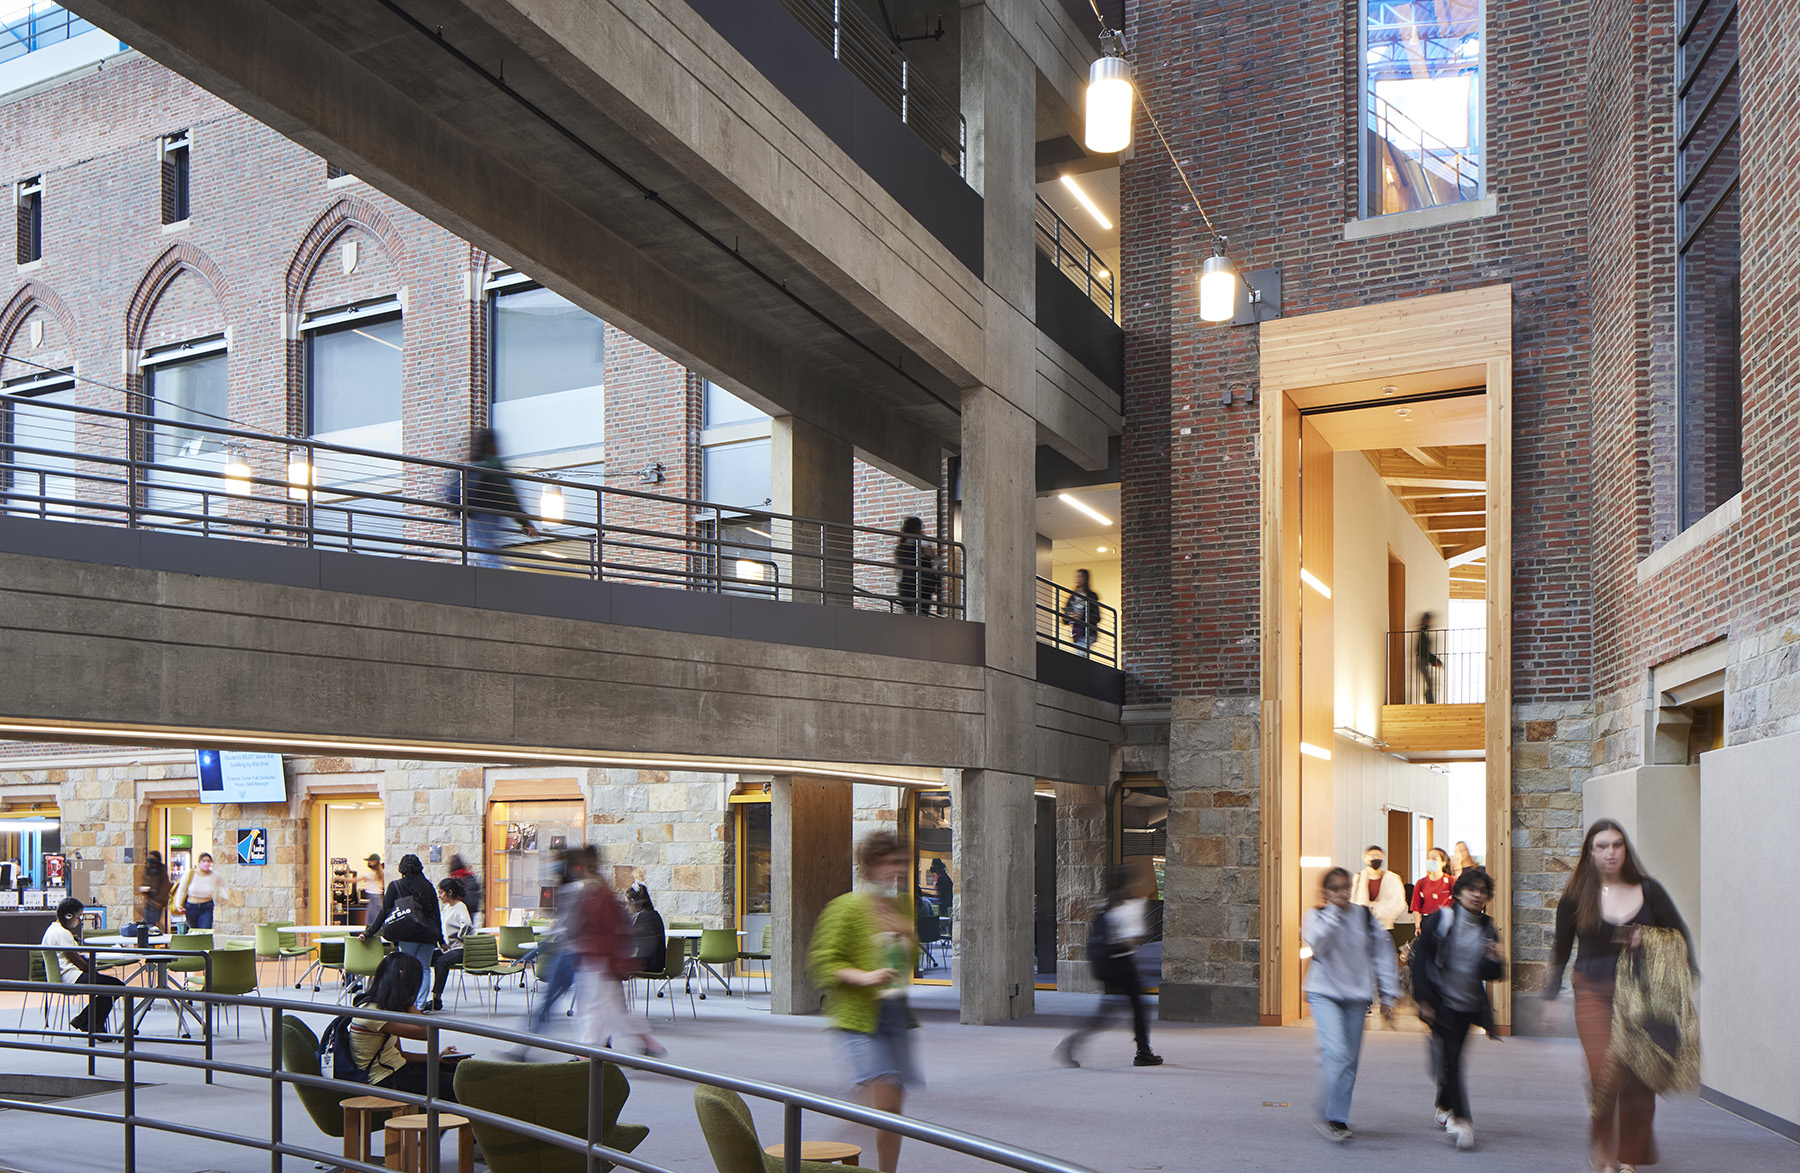 Students walk through a large multistory space.